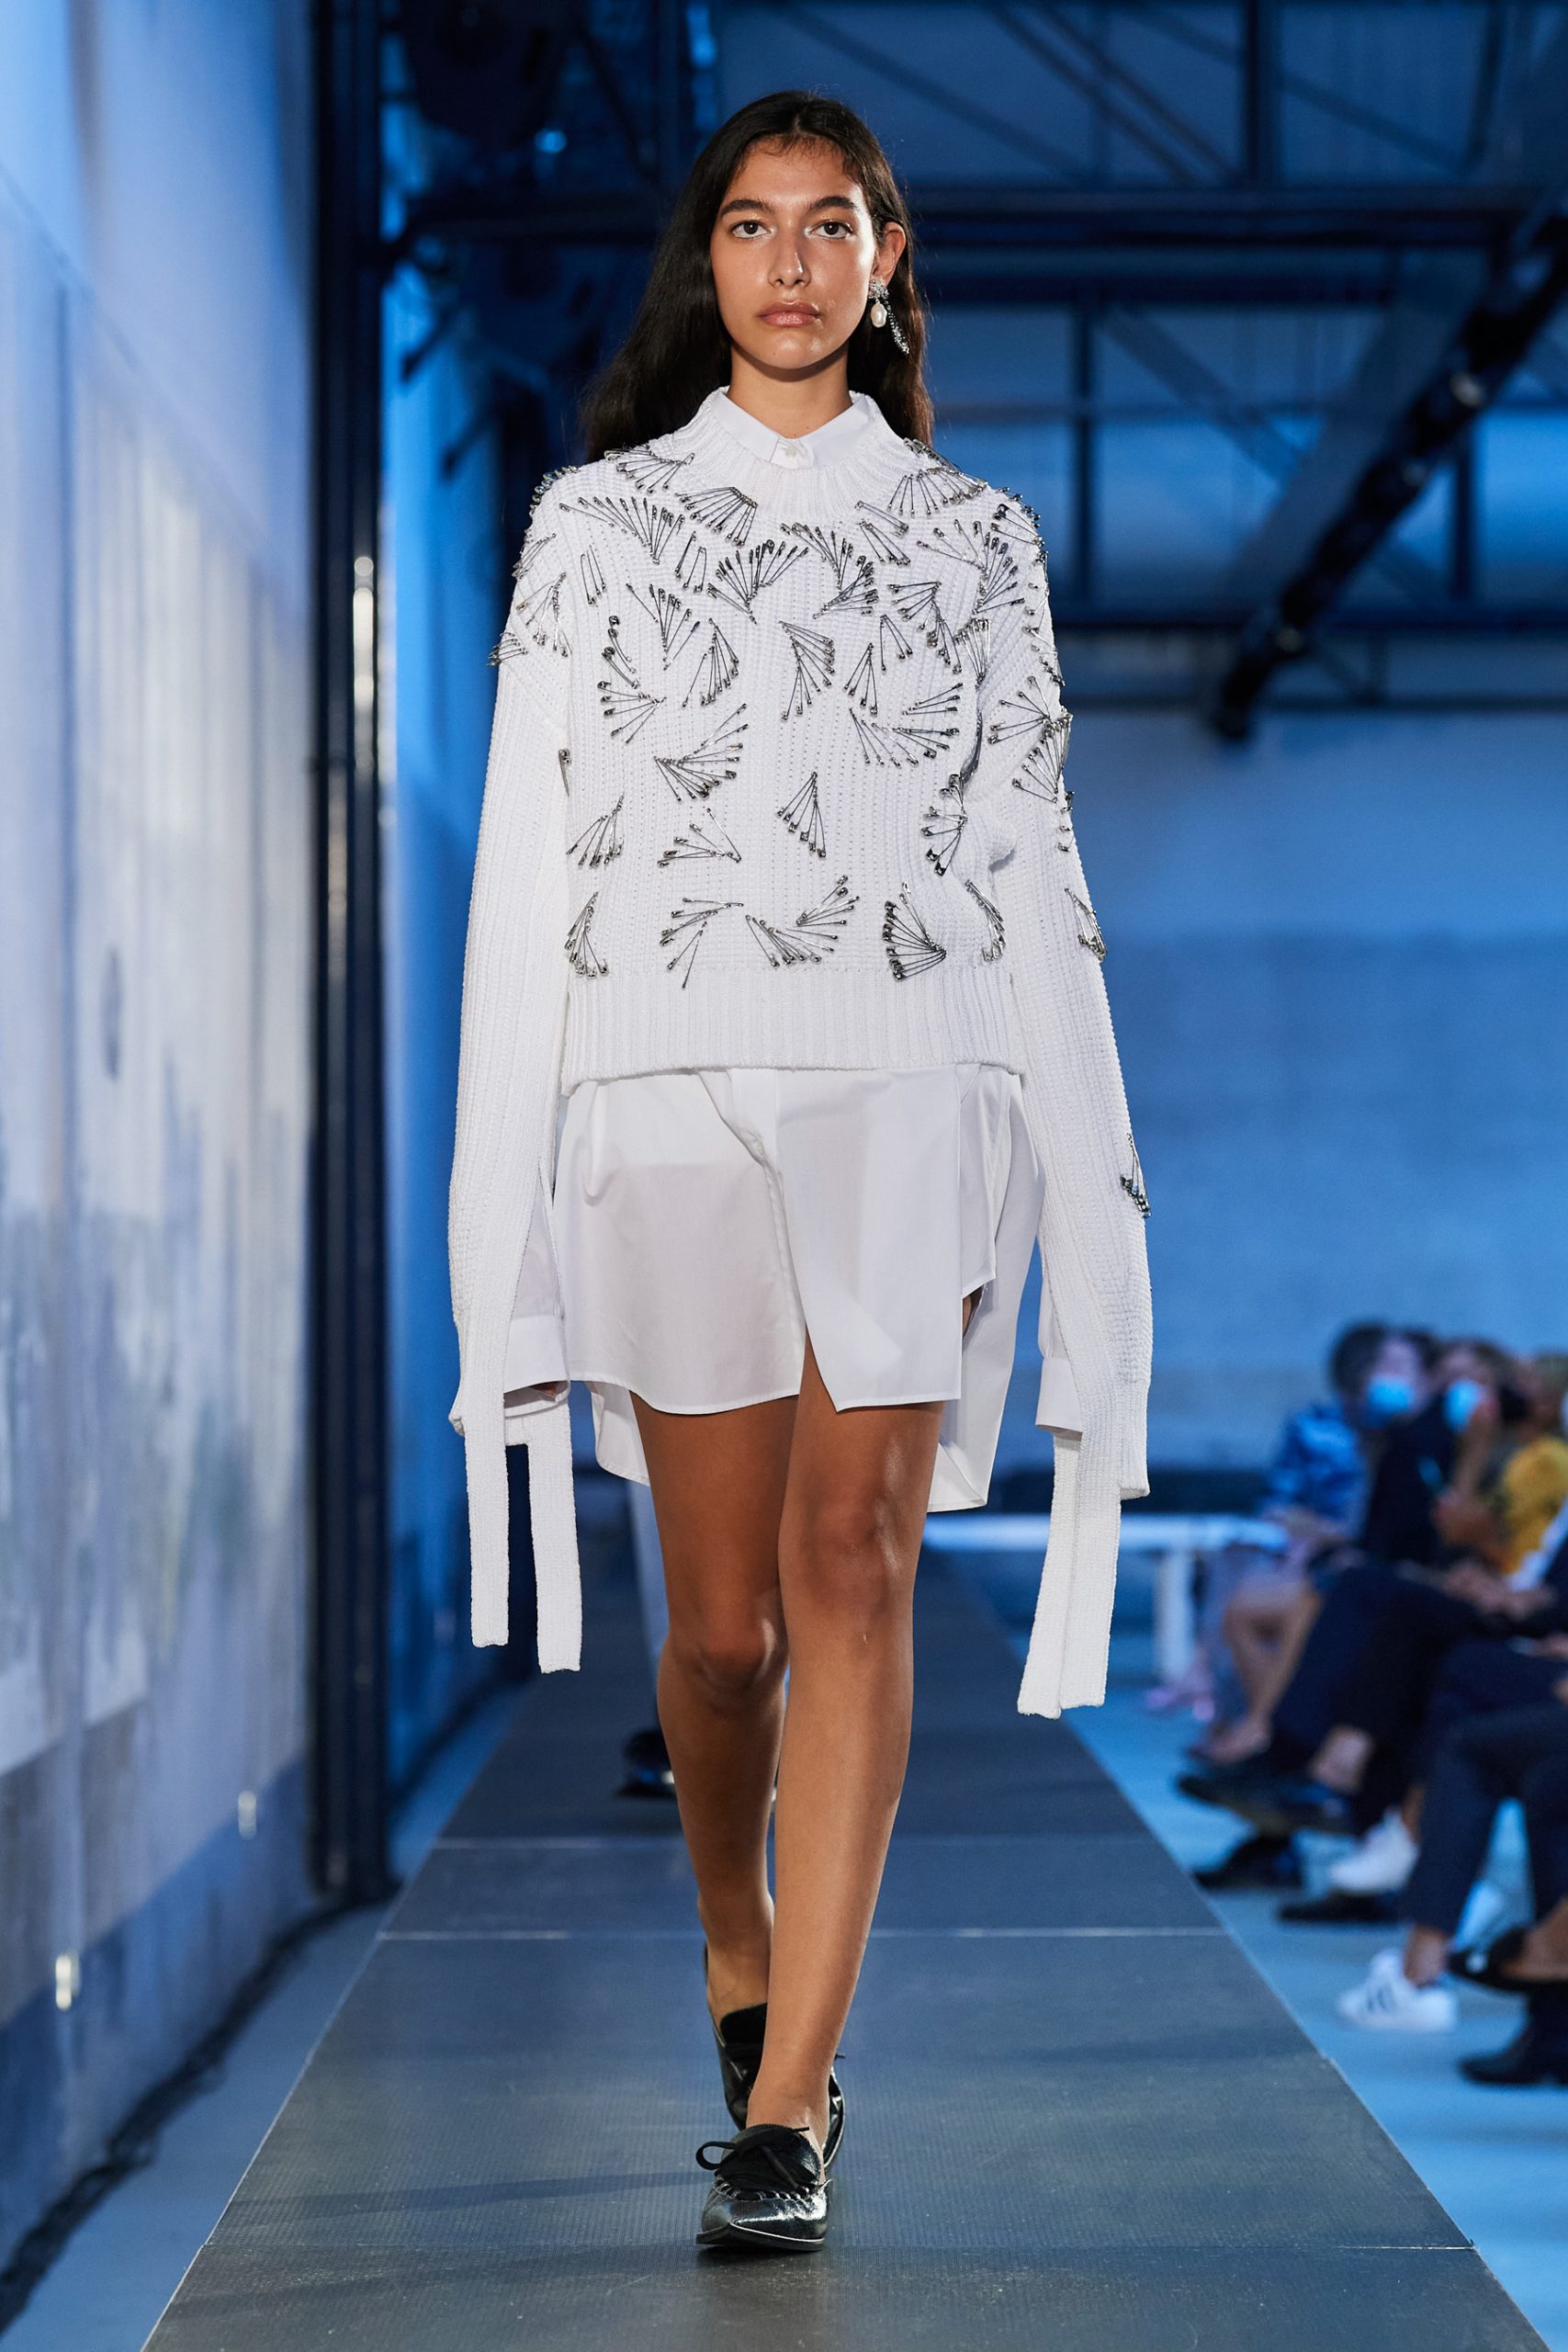 Top 12 Spring 2021 Women's Fashion Shows | The Impression